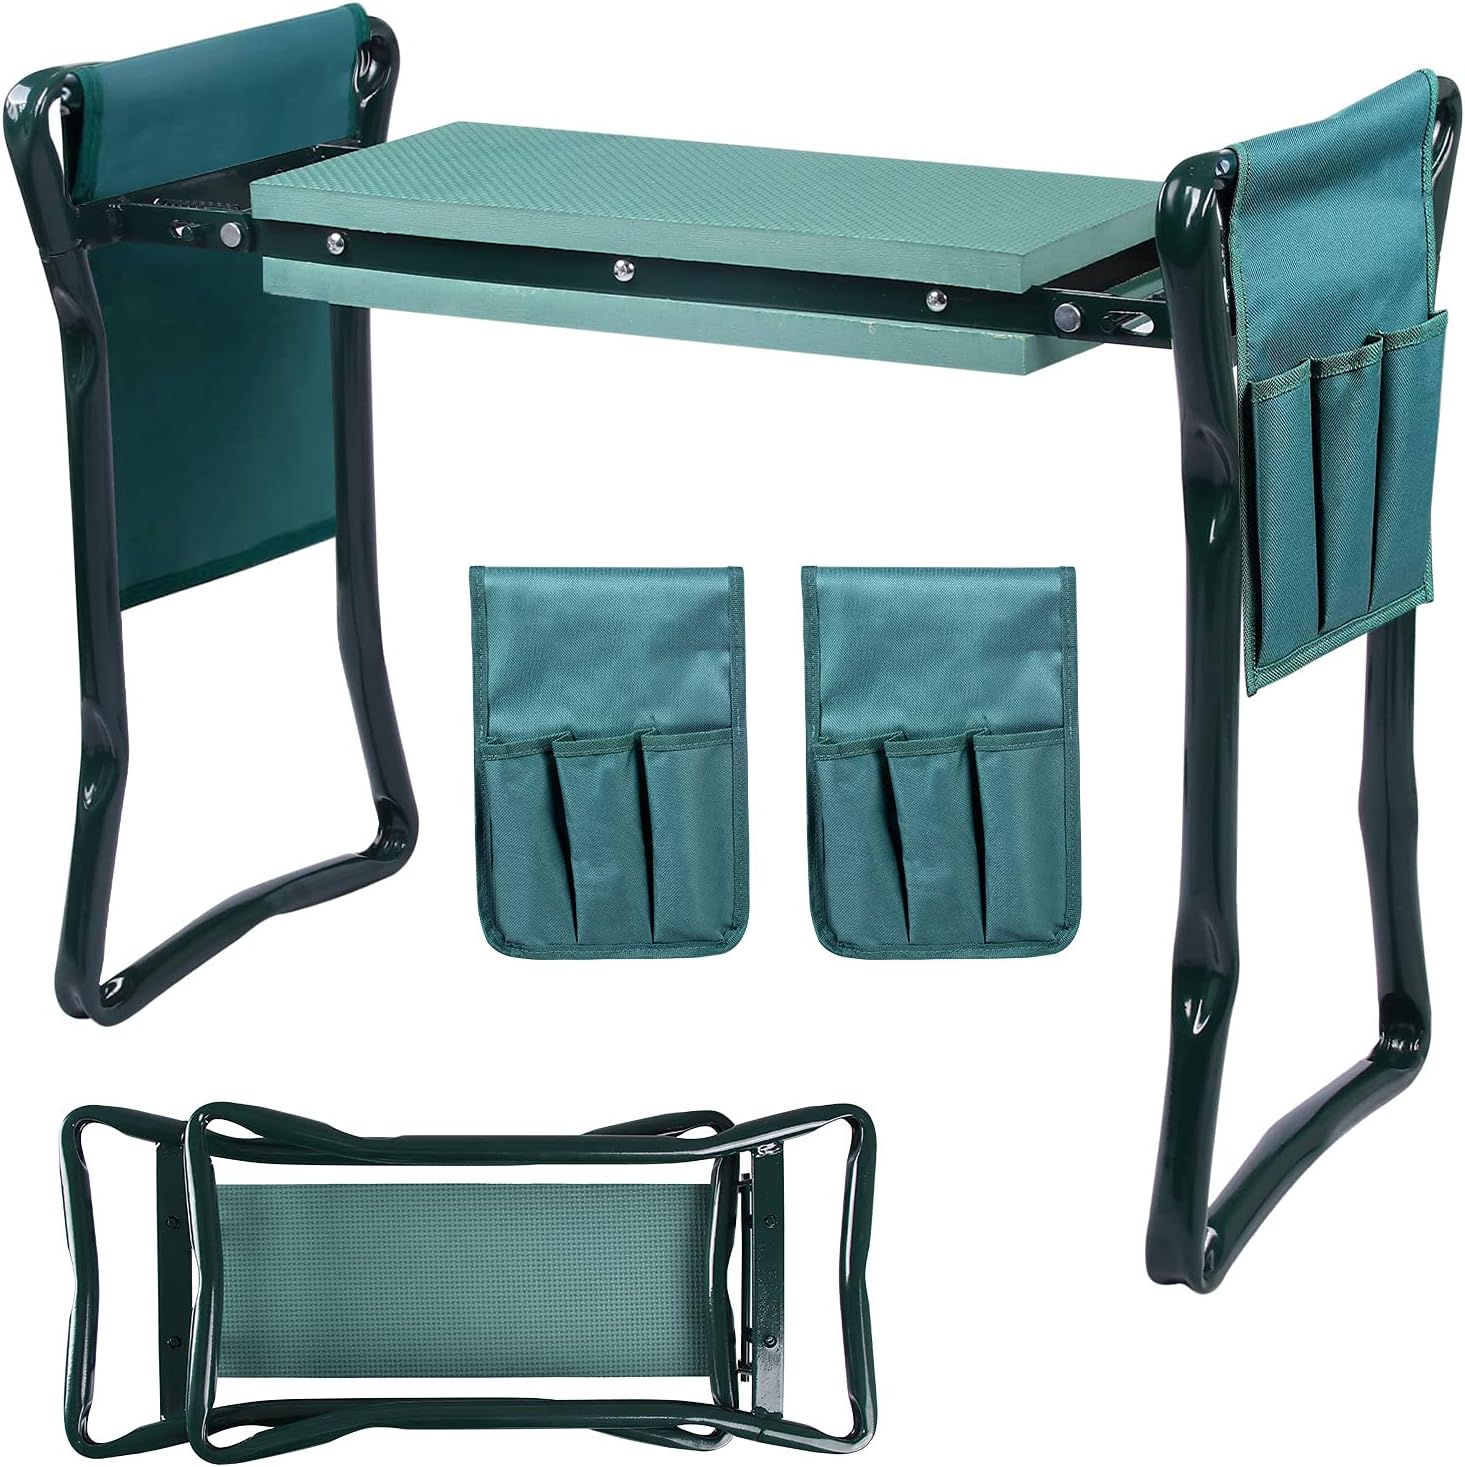 Garden Kneeler Seat Folding Portable Bench Kneeling Pad and Tool Pouch Outdoor 